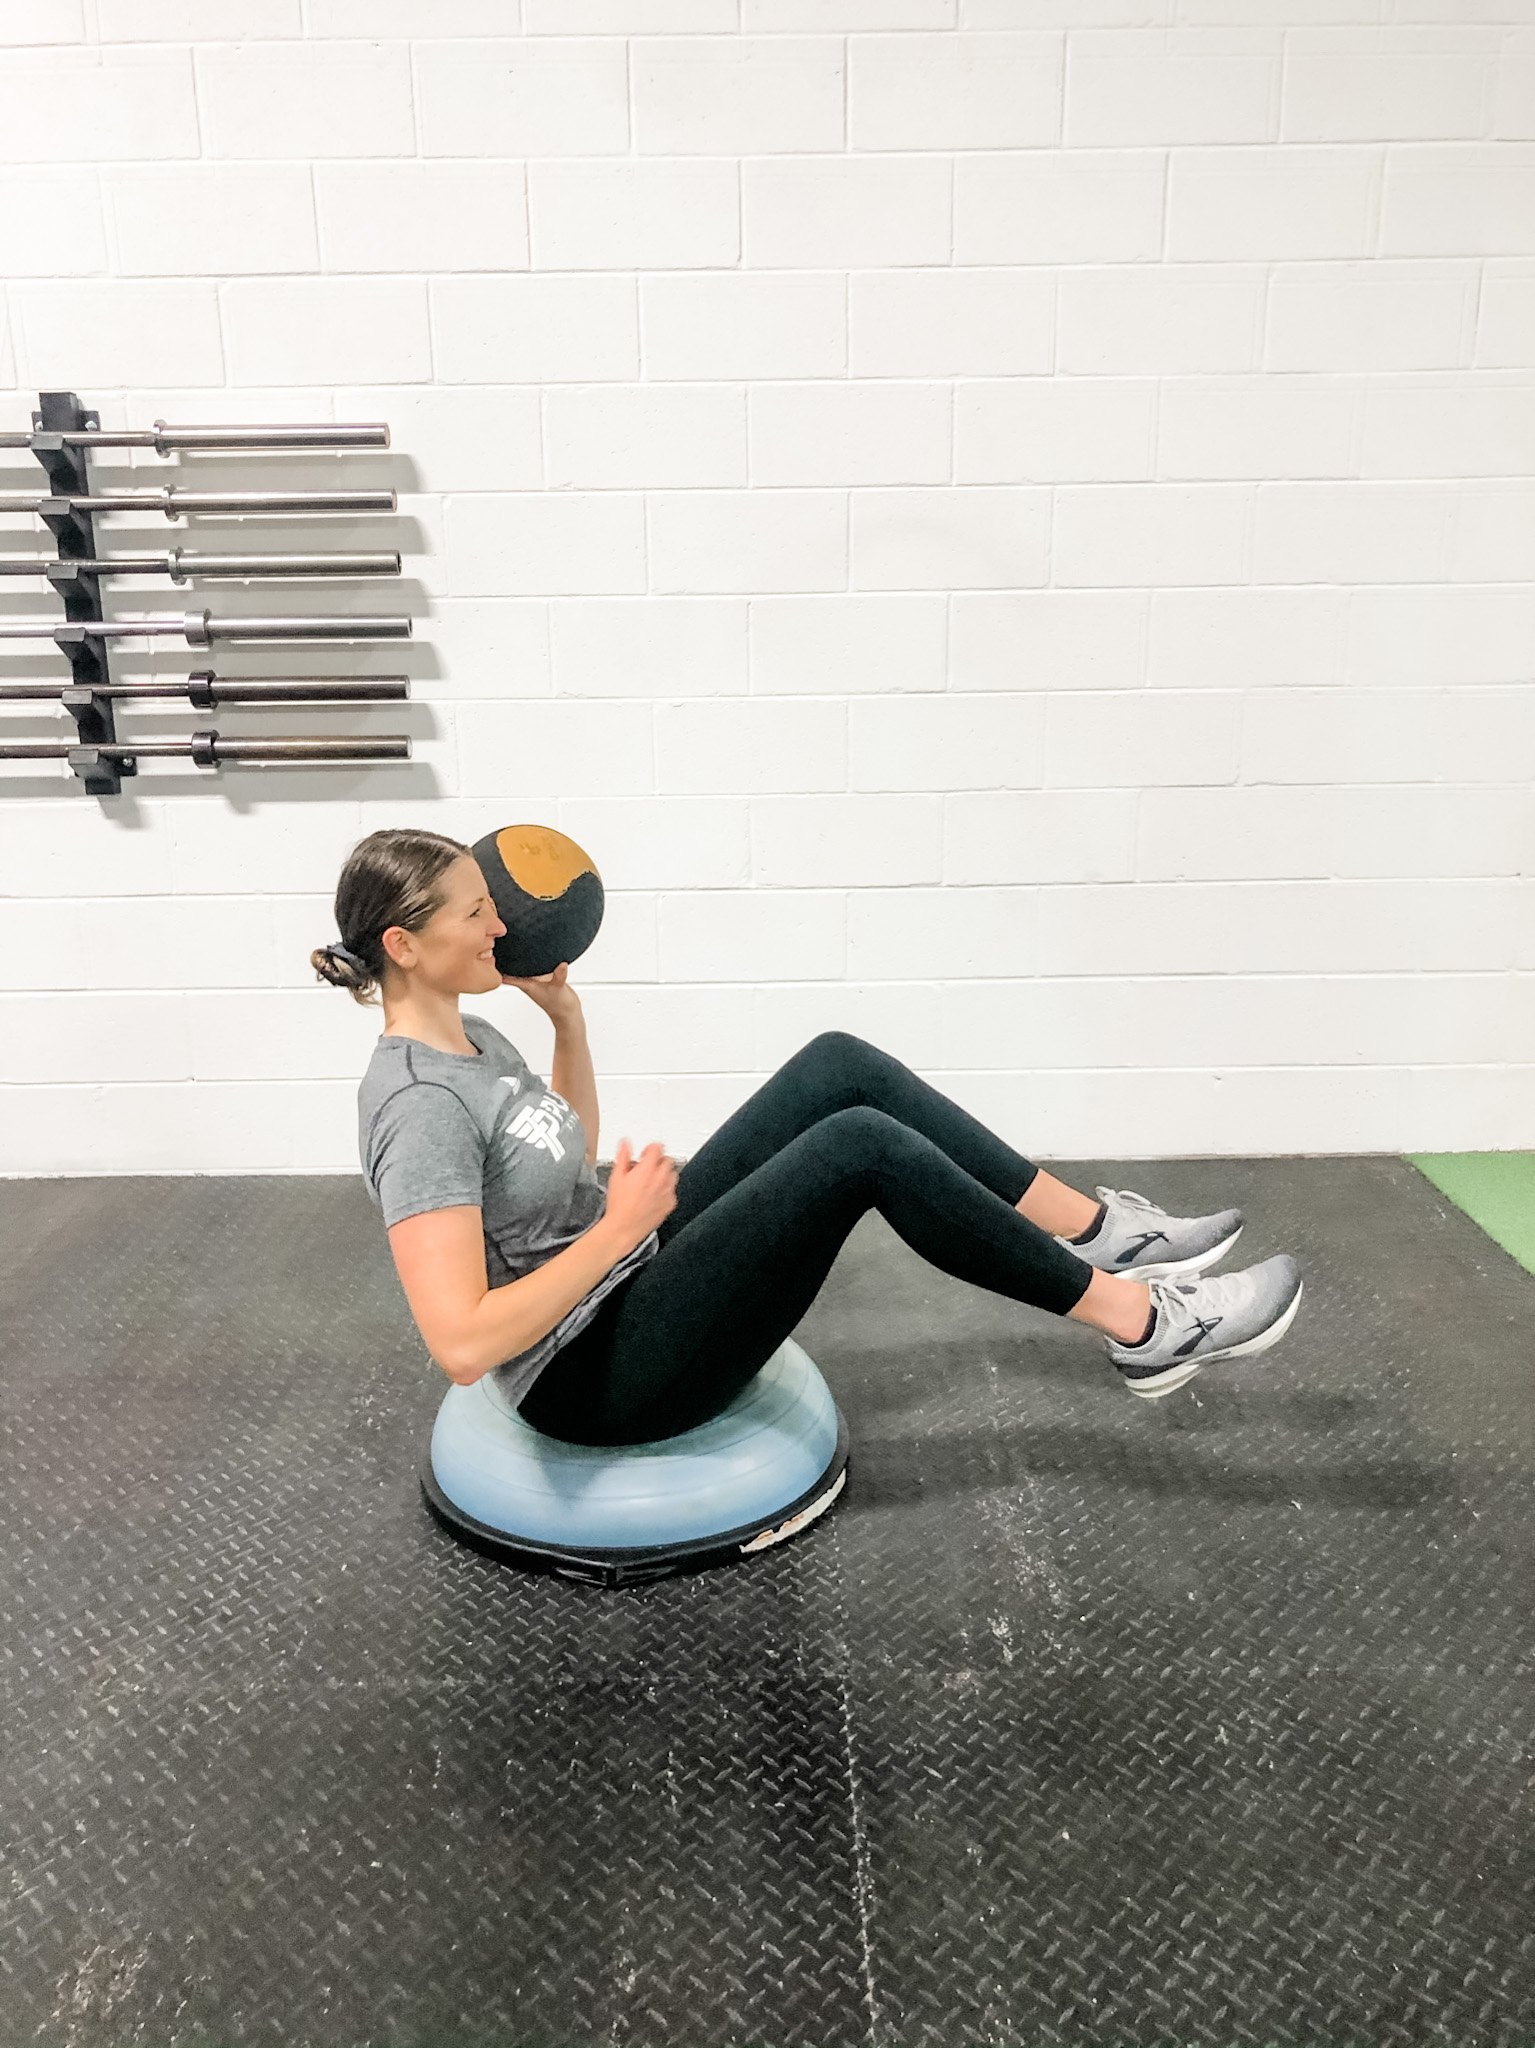 What You Don't Know About BOSU Balls